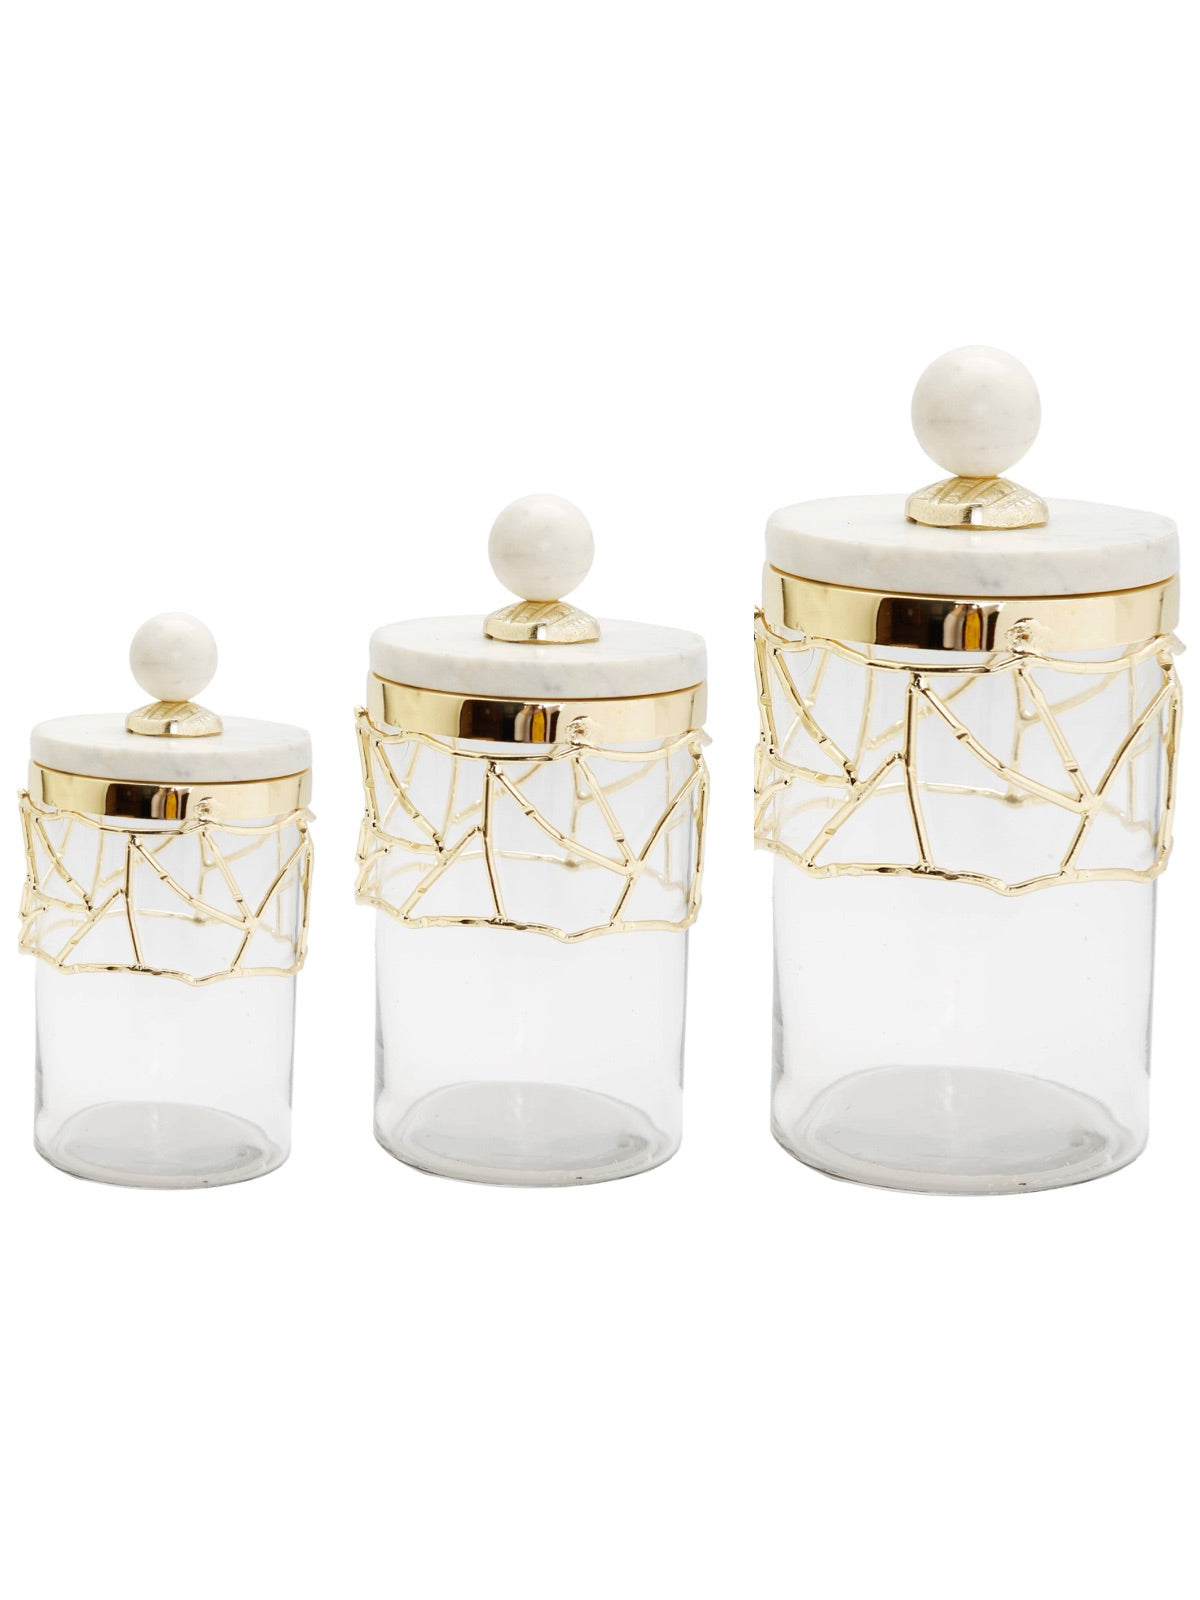 Luxury Kitchen Glass Canister With Gold Mesh Design and Marble Lid, Available in 3 Sizes. 